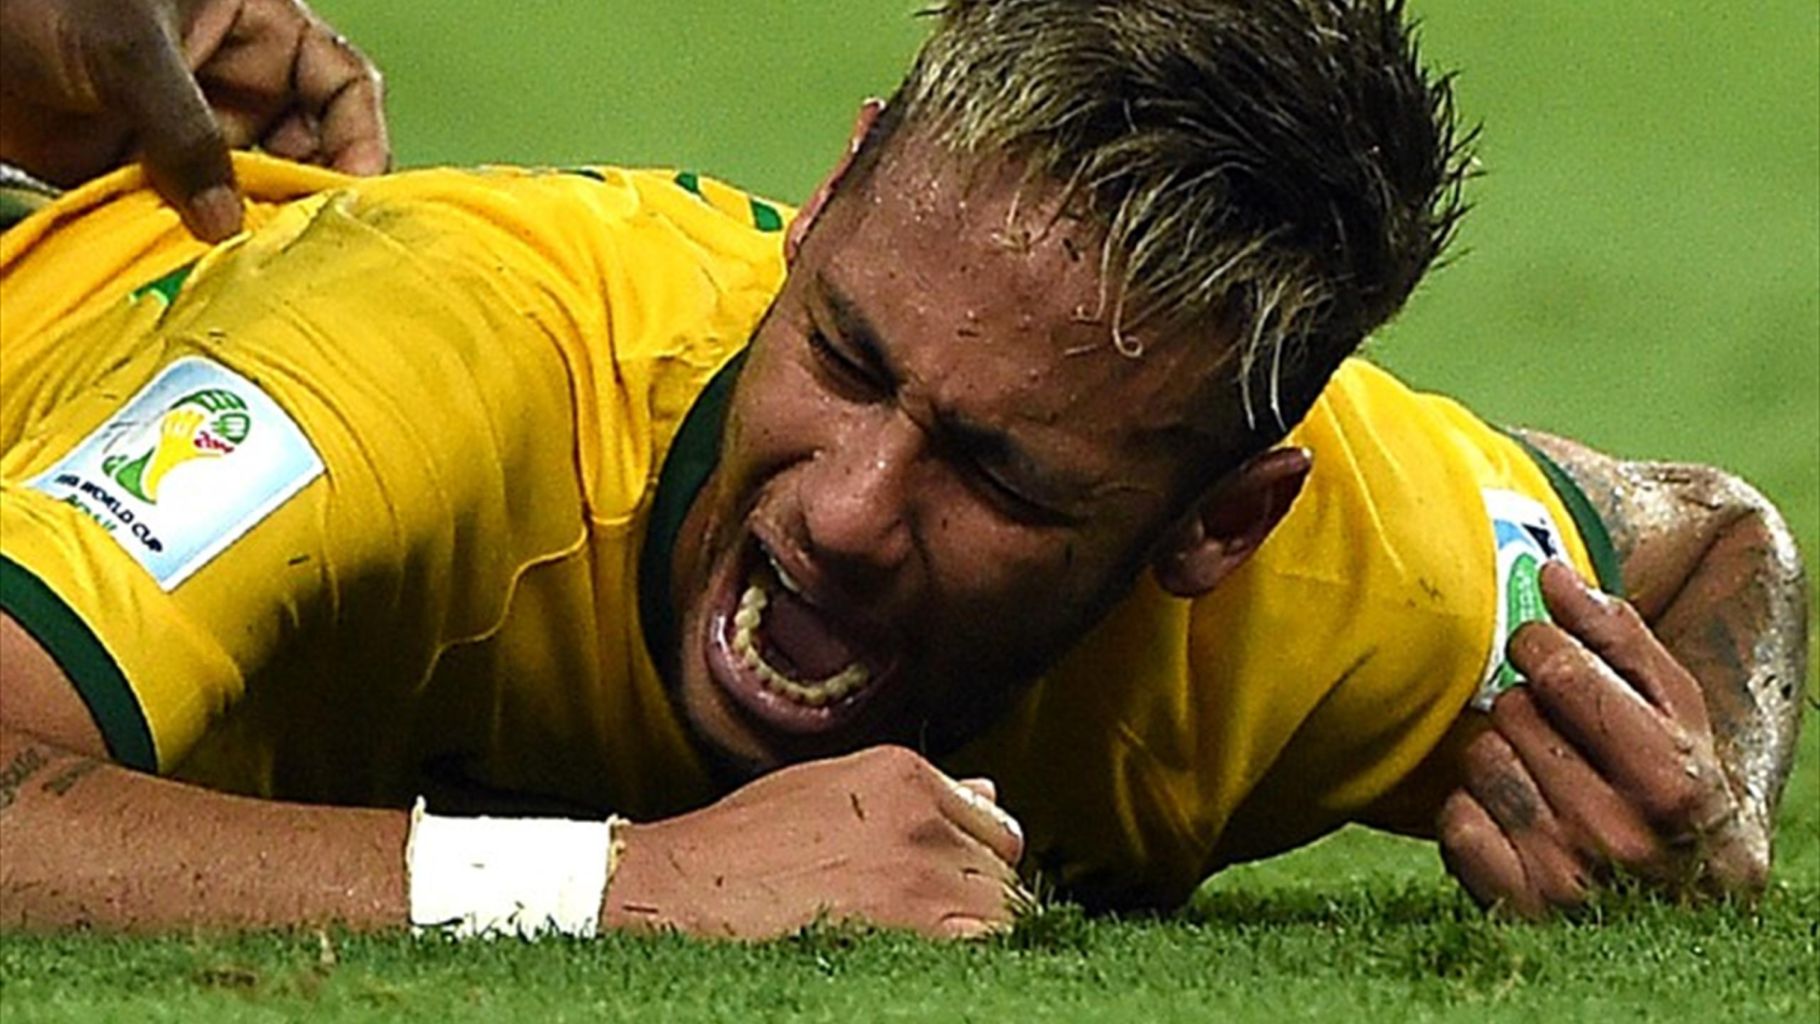 Neymar face of pain, after his vertebra fracture injury, in the World Cup